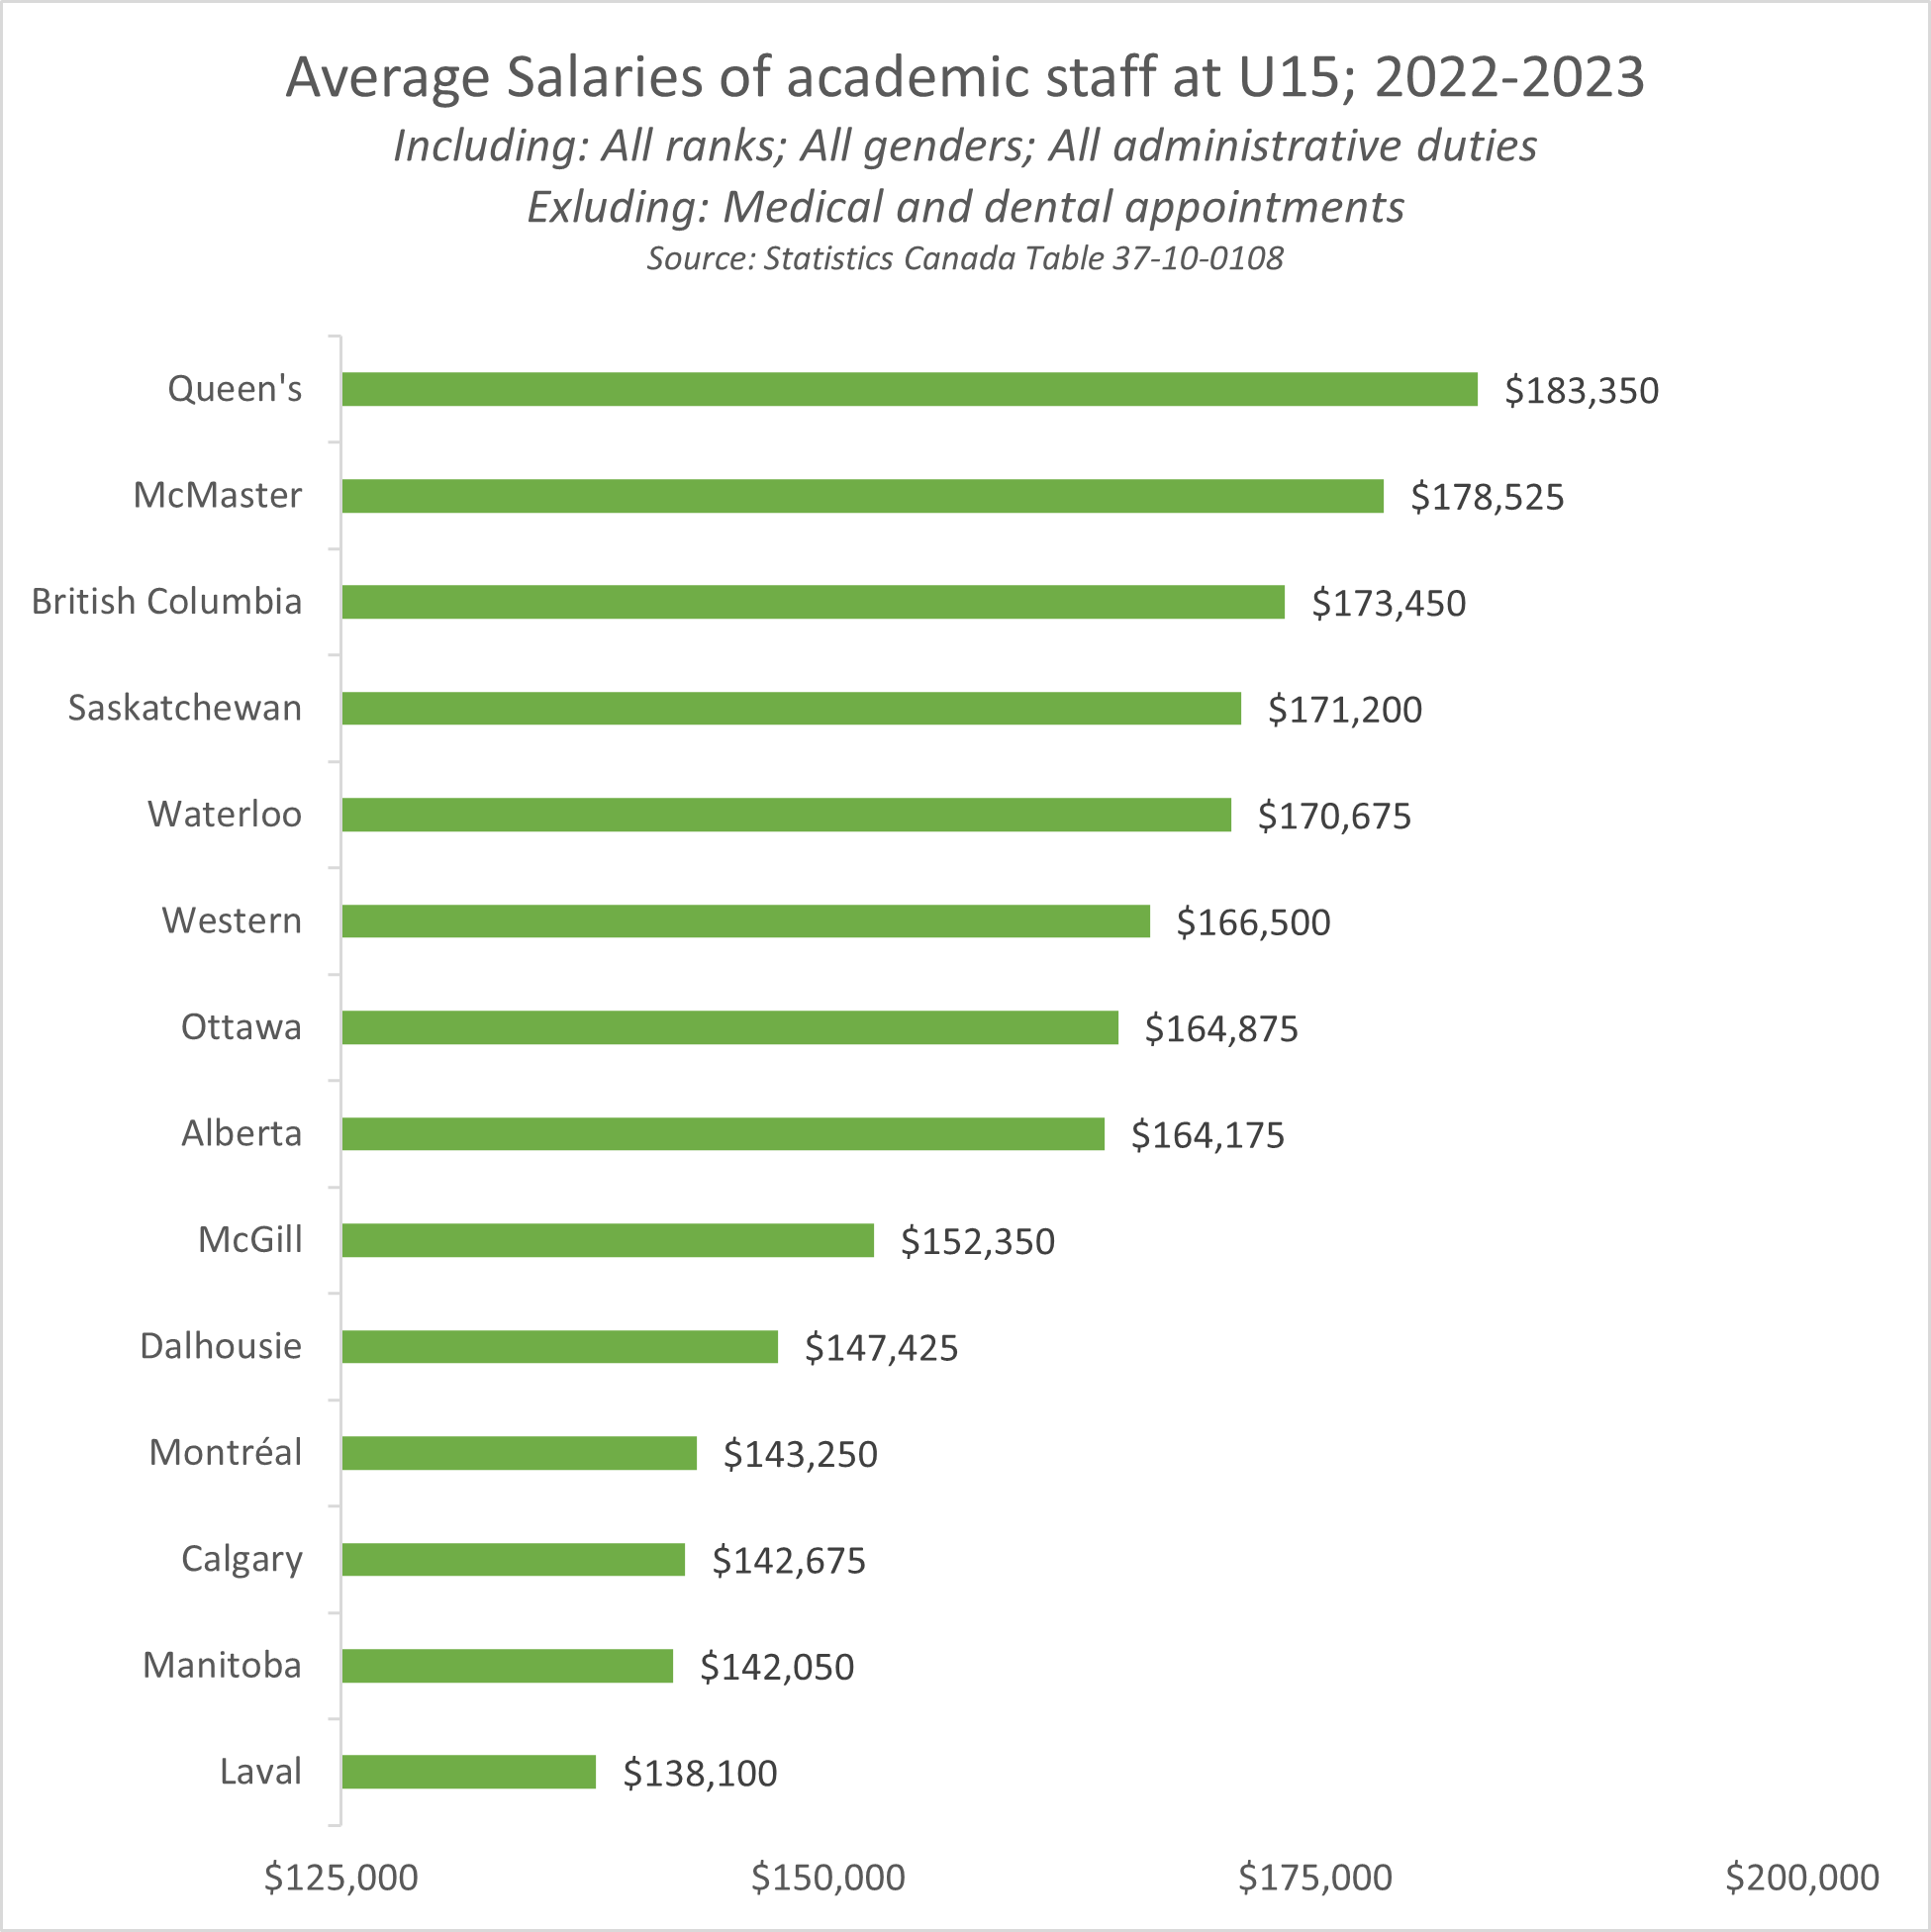 Bar chart showing average salaries of full-time academic staff at U15 Universities in Canada for 2022-2023. The averages include all ranks, all genders, all administrative duties, but they exclude medical and dental appointments. The chart shows Queen's University as the highest paid, University of Alberta as eighth and University of Calgary as twelfth. Note that the chart is missing University of Toronto as data was not available at the time and the University of Toronto is consistently at the top.